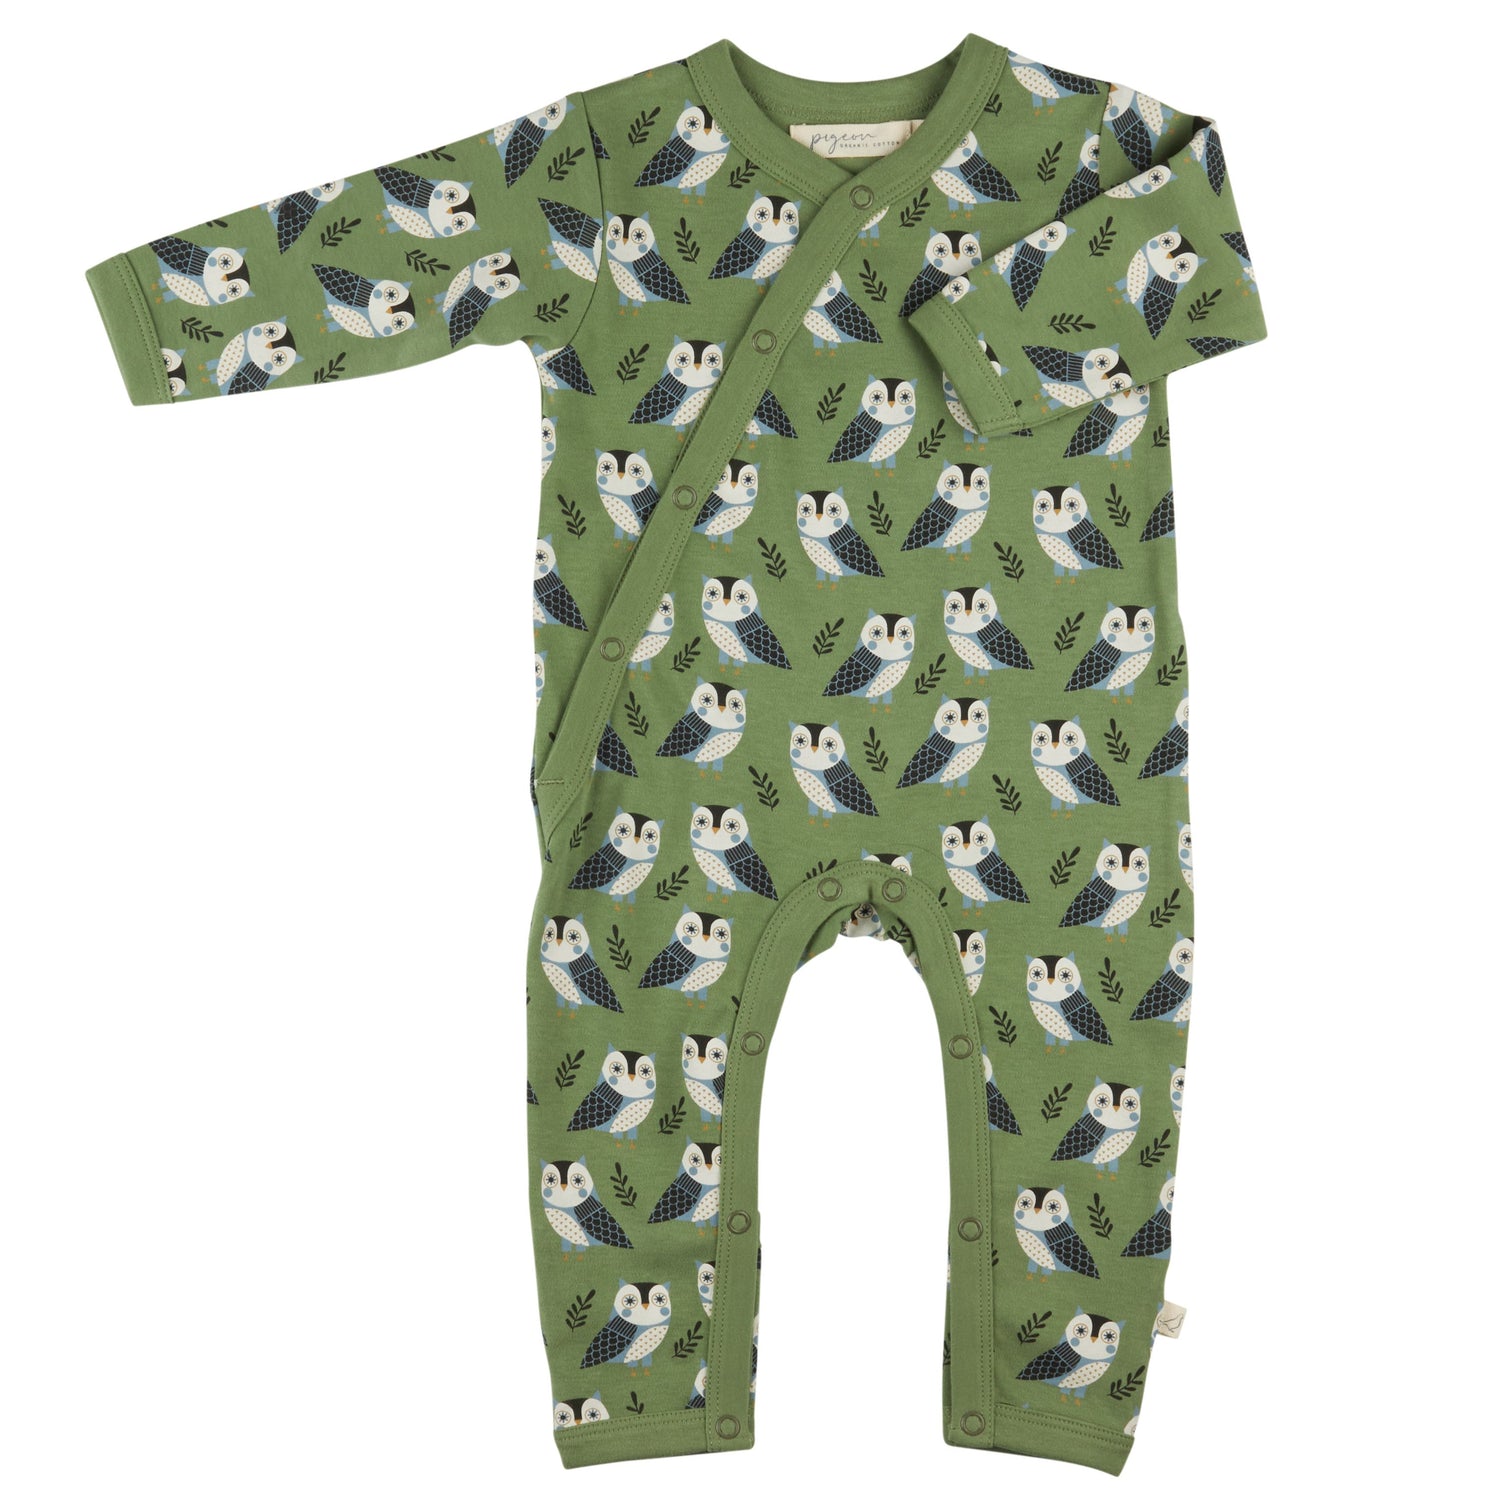 GOTS certified organic cotton baby sleepsuit in green with navy blue and white owl print.